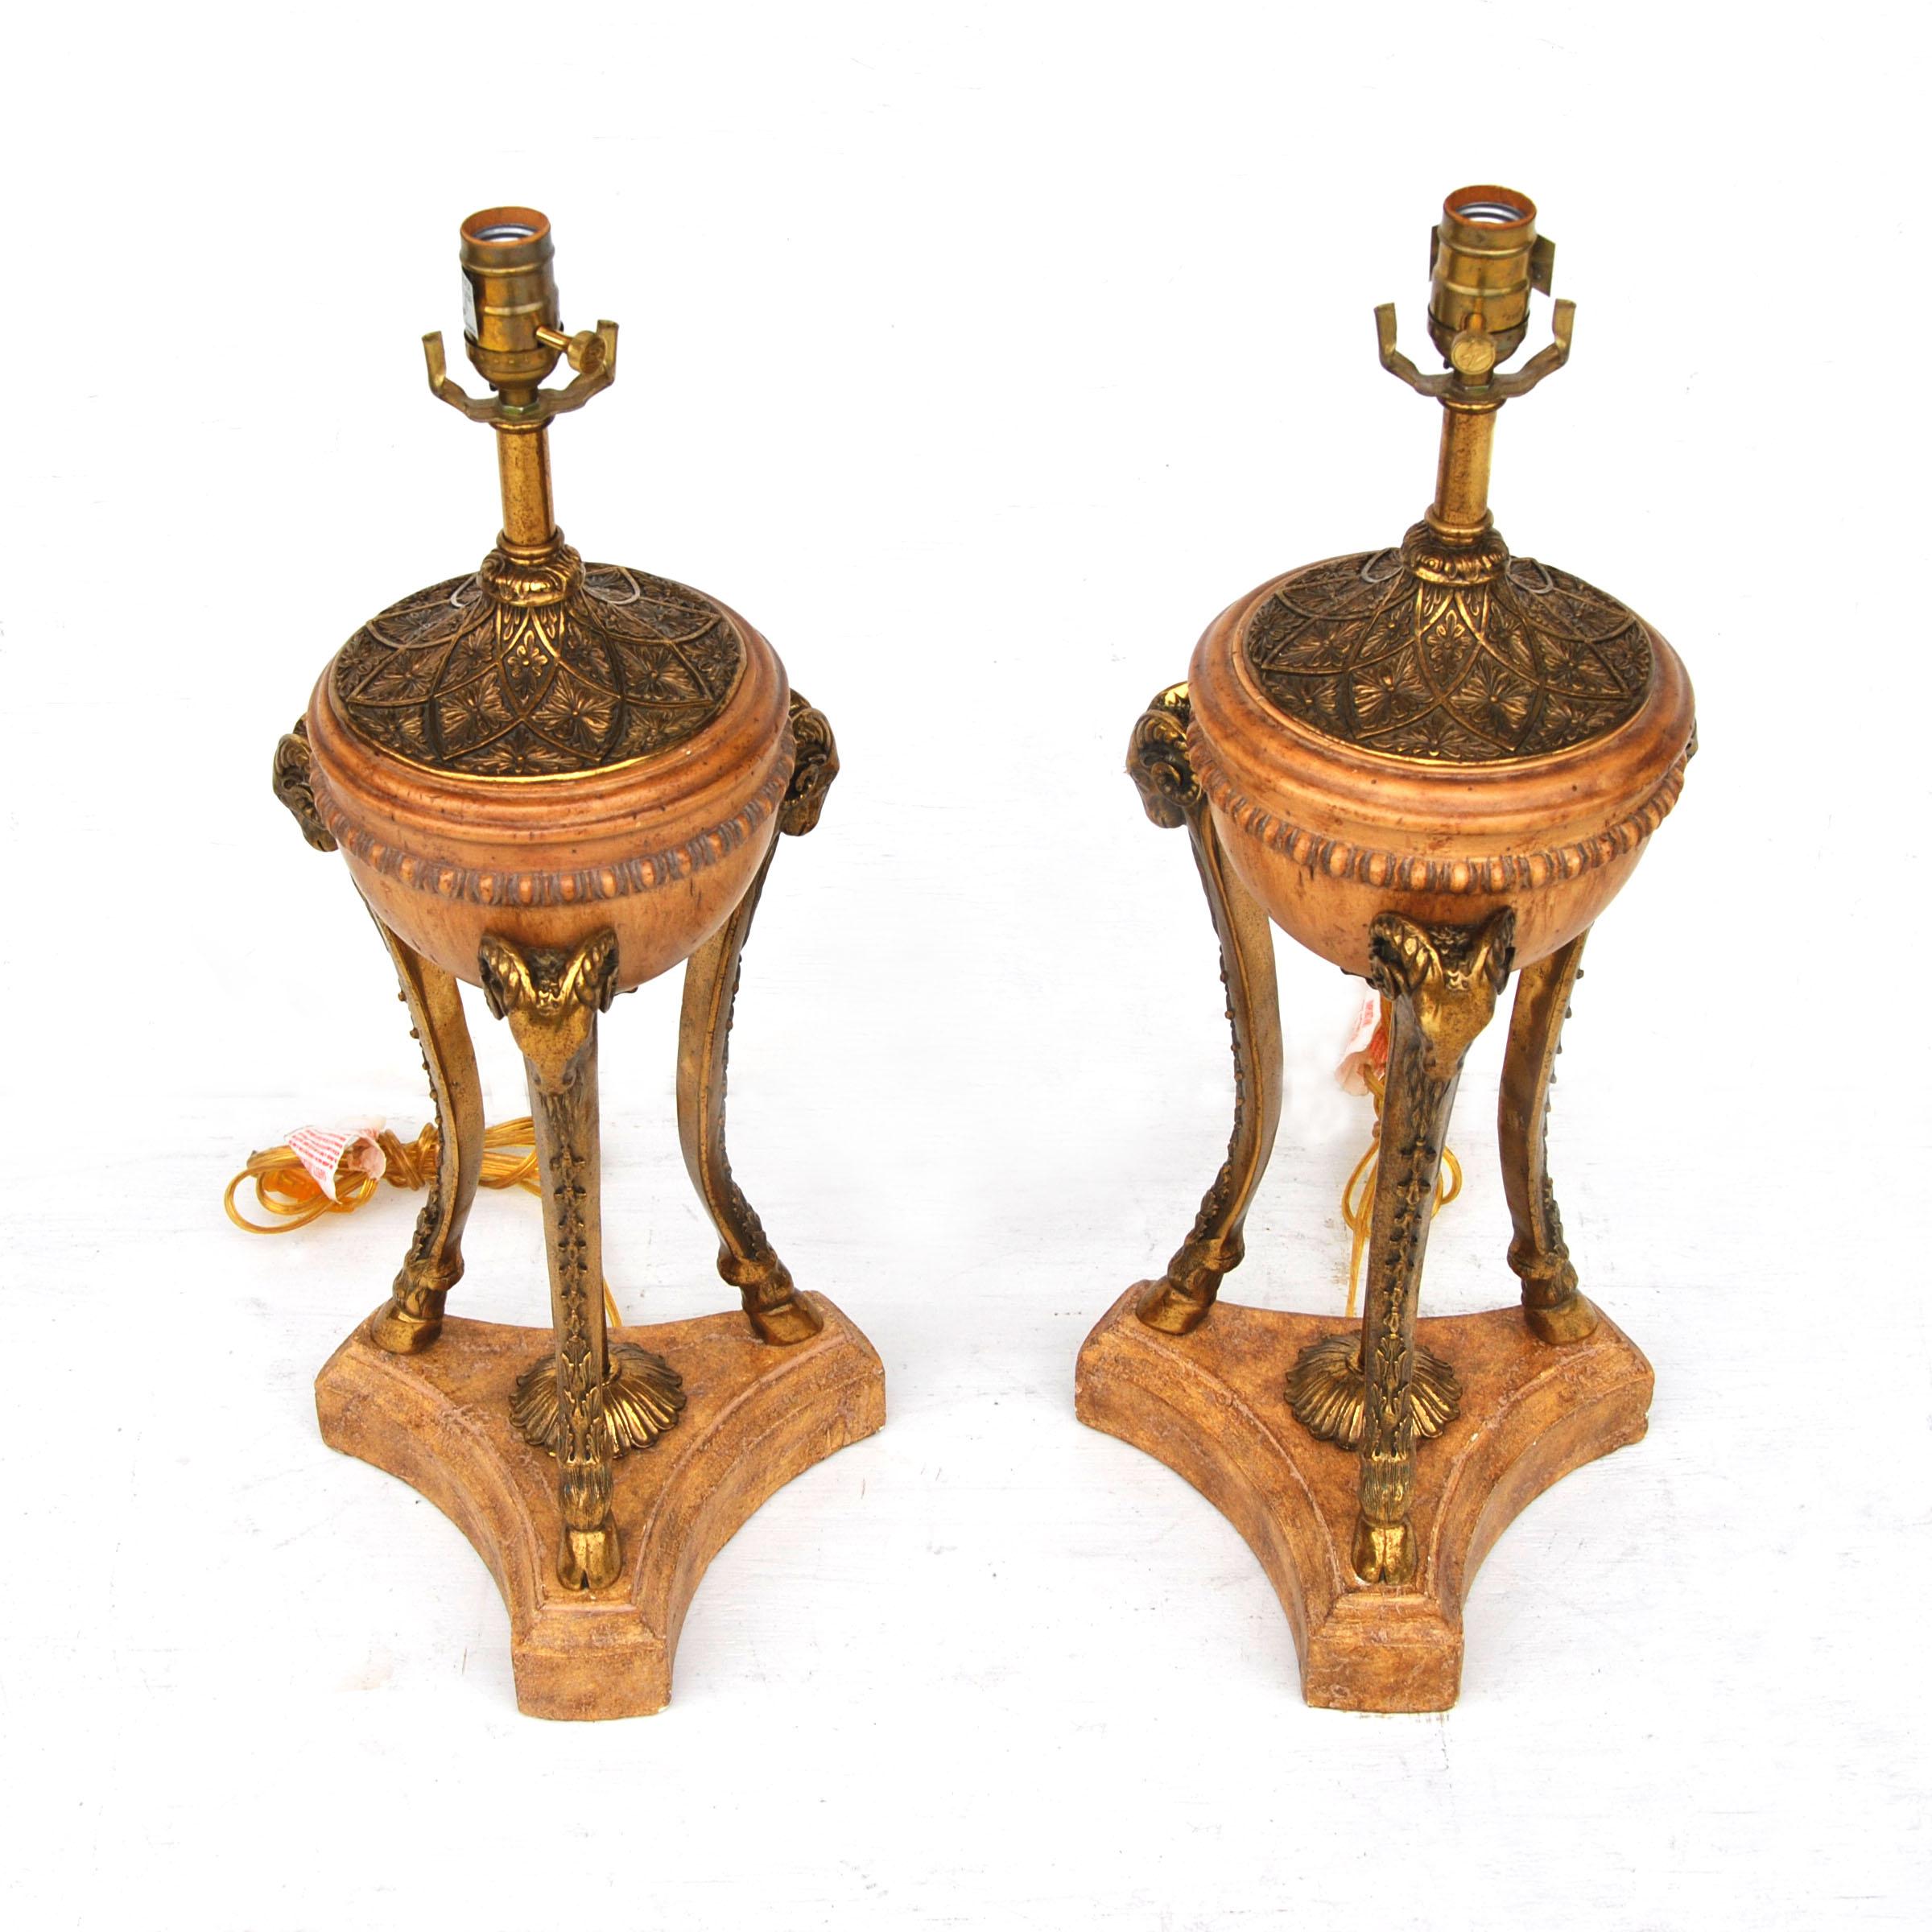 Maitland-Smith

Pair of Maitland-Smith neoclassical ram head table lamps
Urn style carved wood lamps with gold details.

       